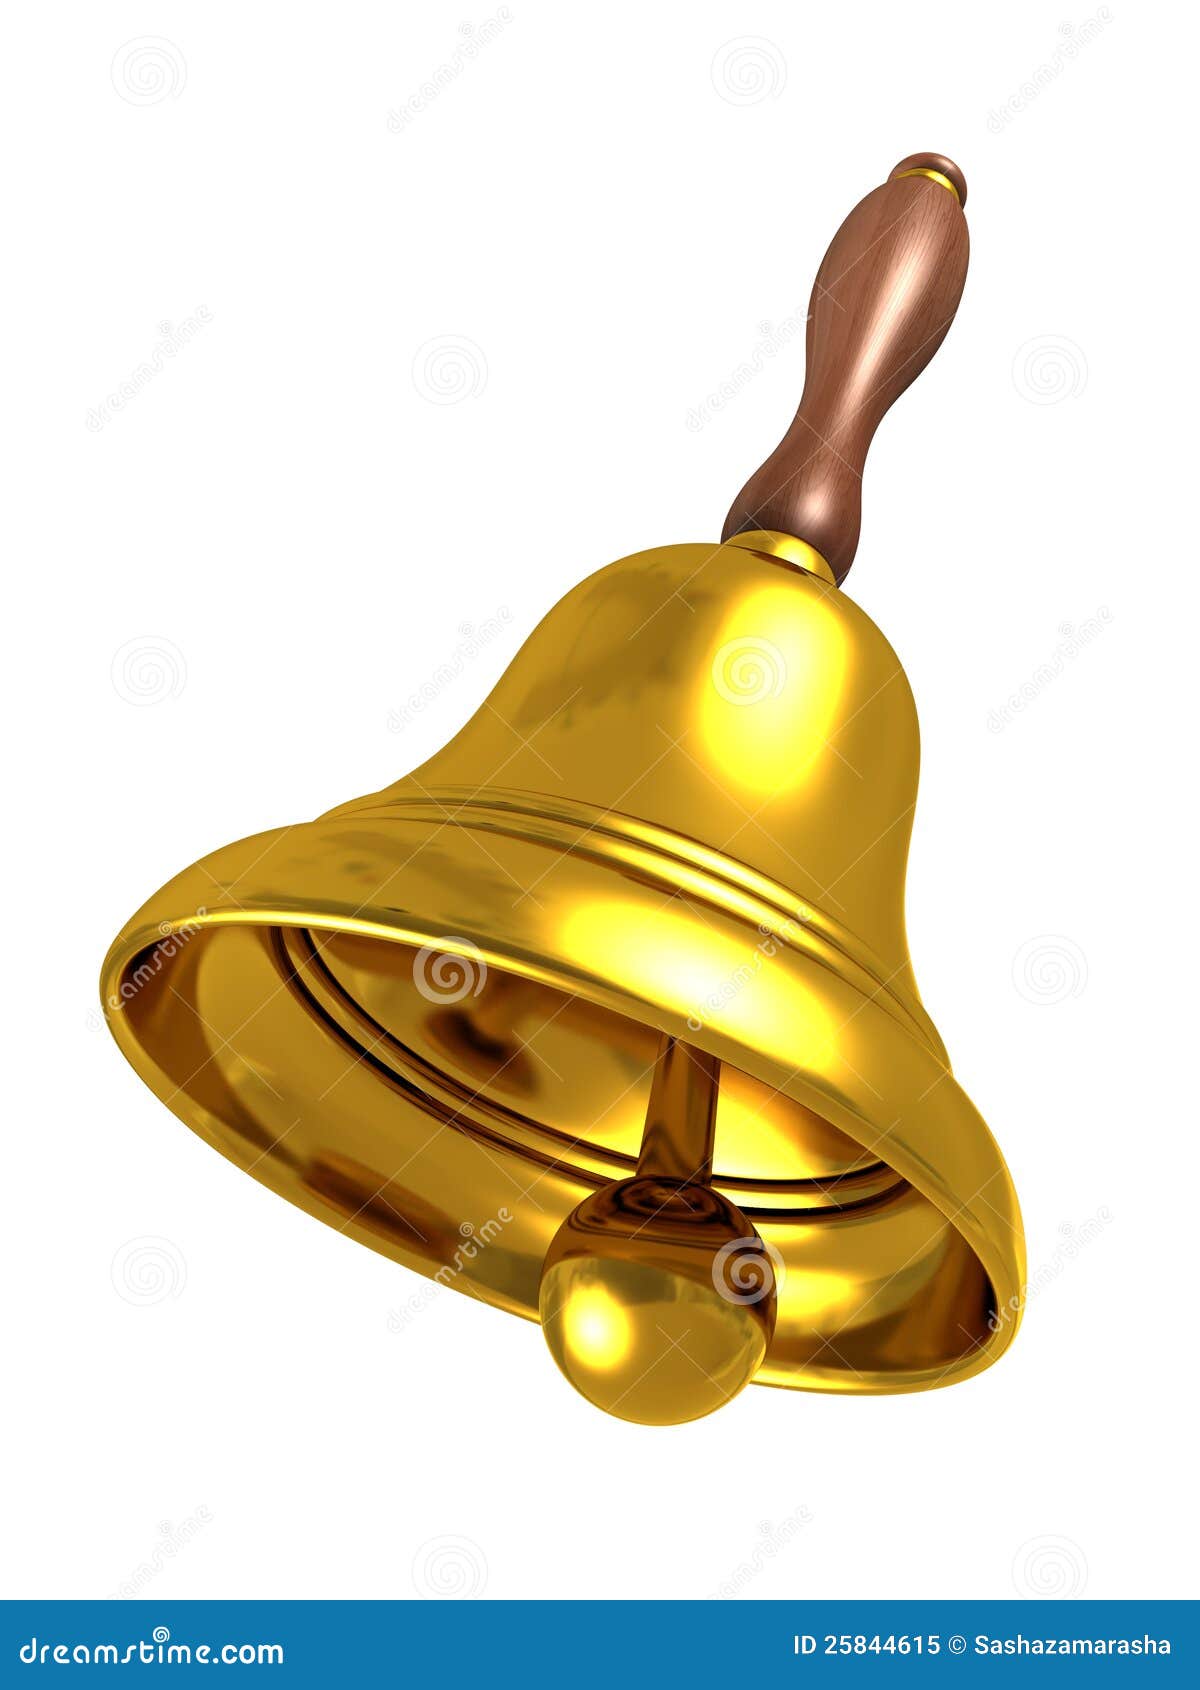 Image result for bell